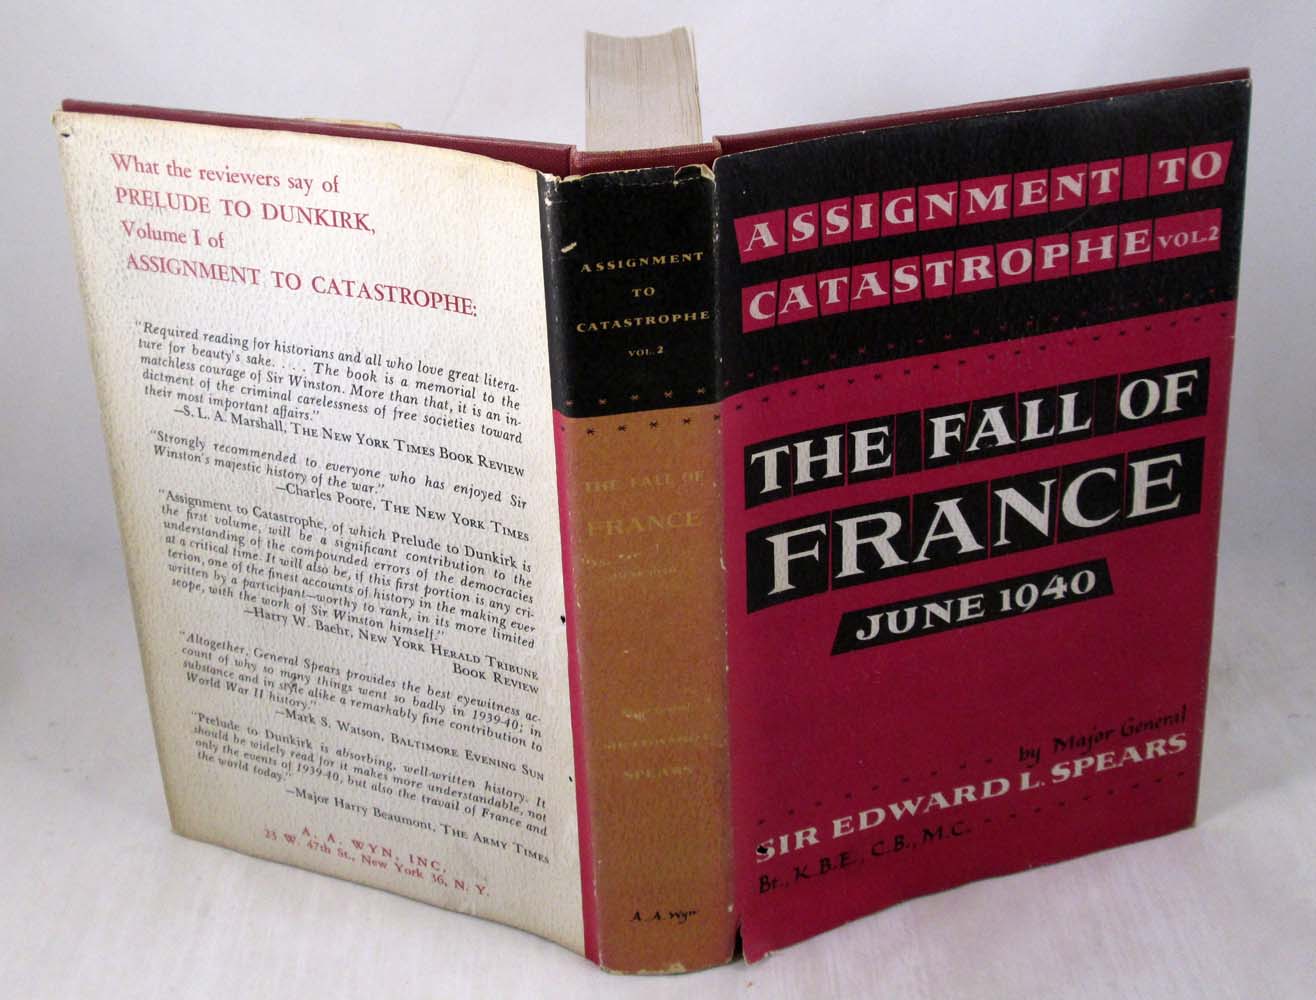 Assignment to Catastrophe, Volume 2: The Fall of France, June 1940